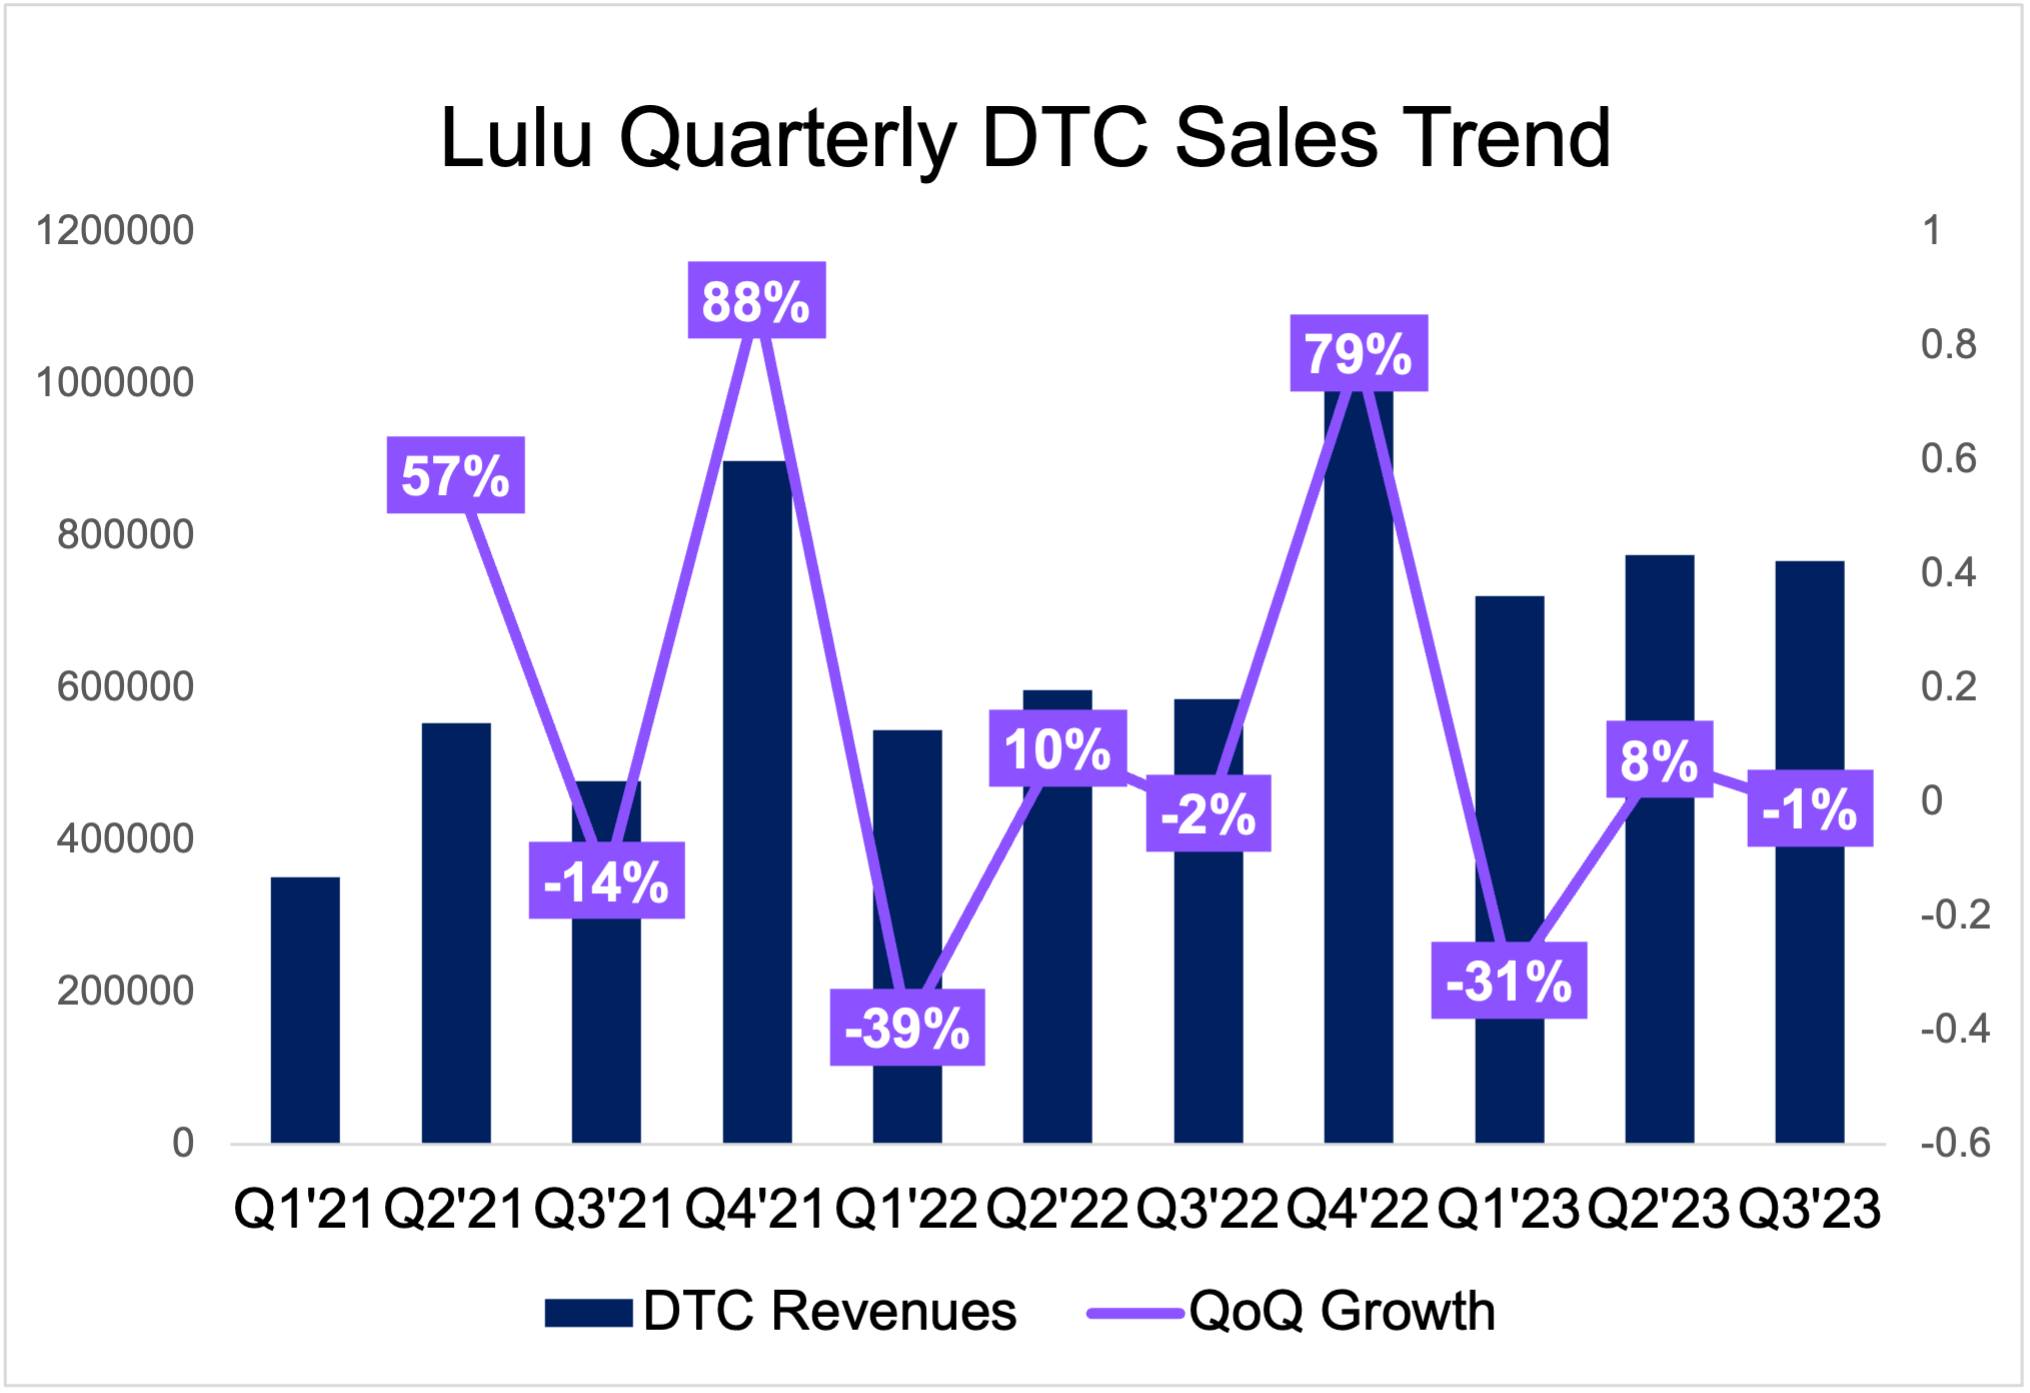 Nike Vs. Lululemon: One With A Moat, One With Growth (NASDAQ:LULU